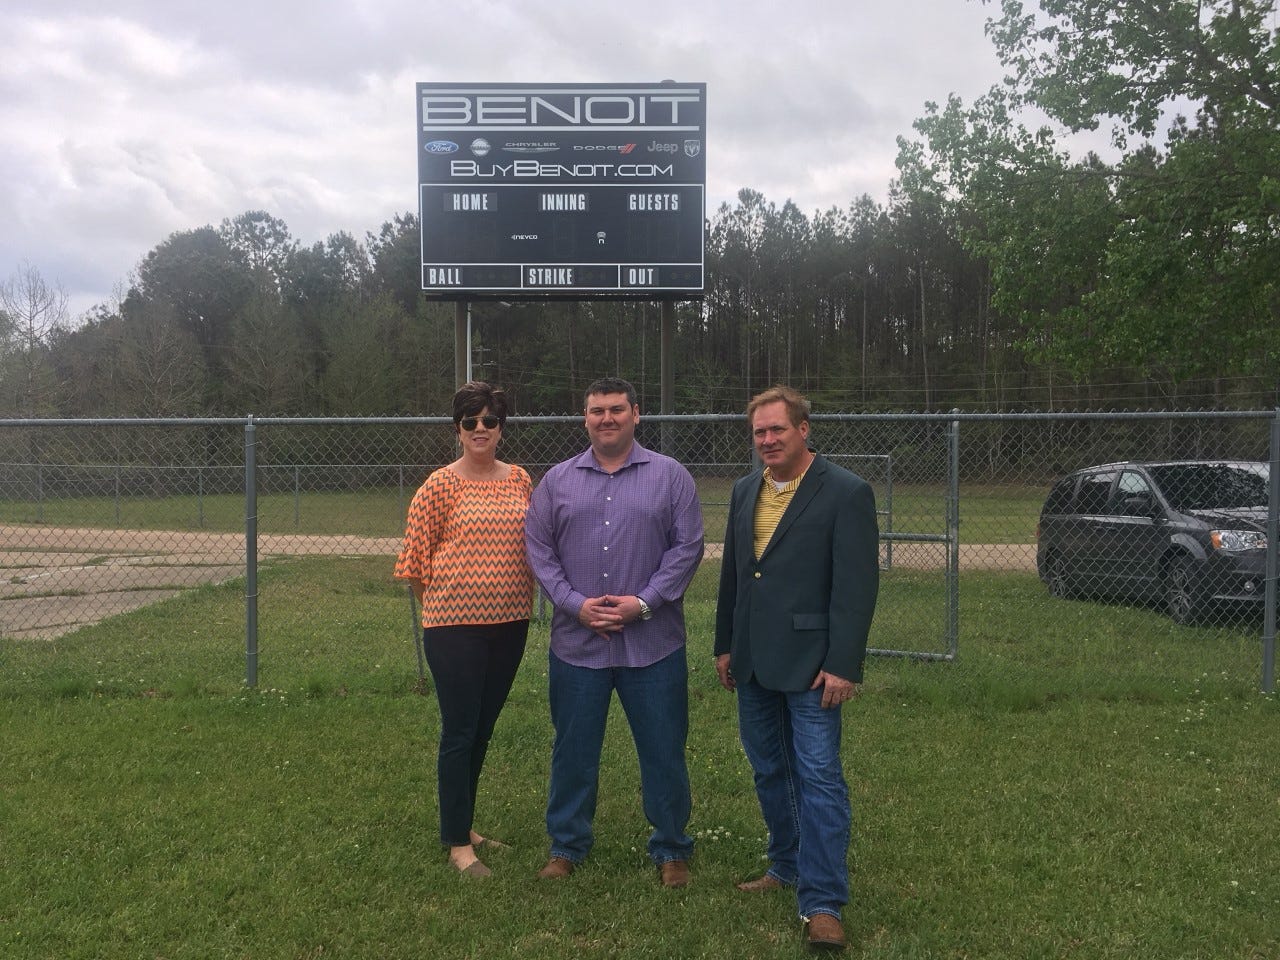 Pictured are Patti Larney, City of Leesville Administrator, Jason Benoit, owner of Benoit Motors, and Grant Bush, City of Leesville Director of Planning.